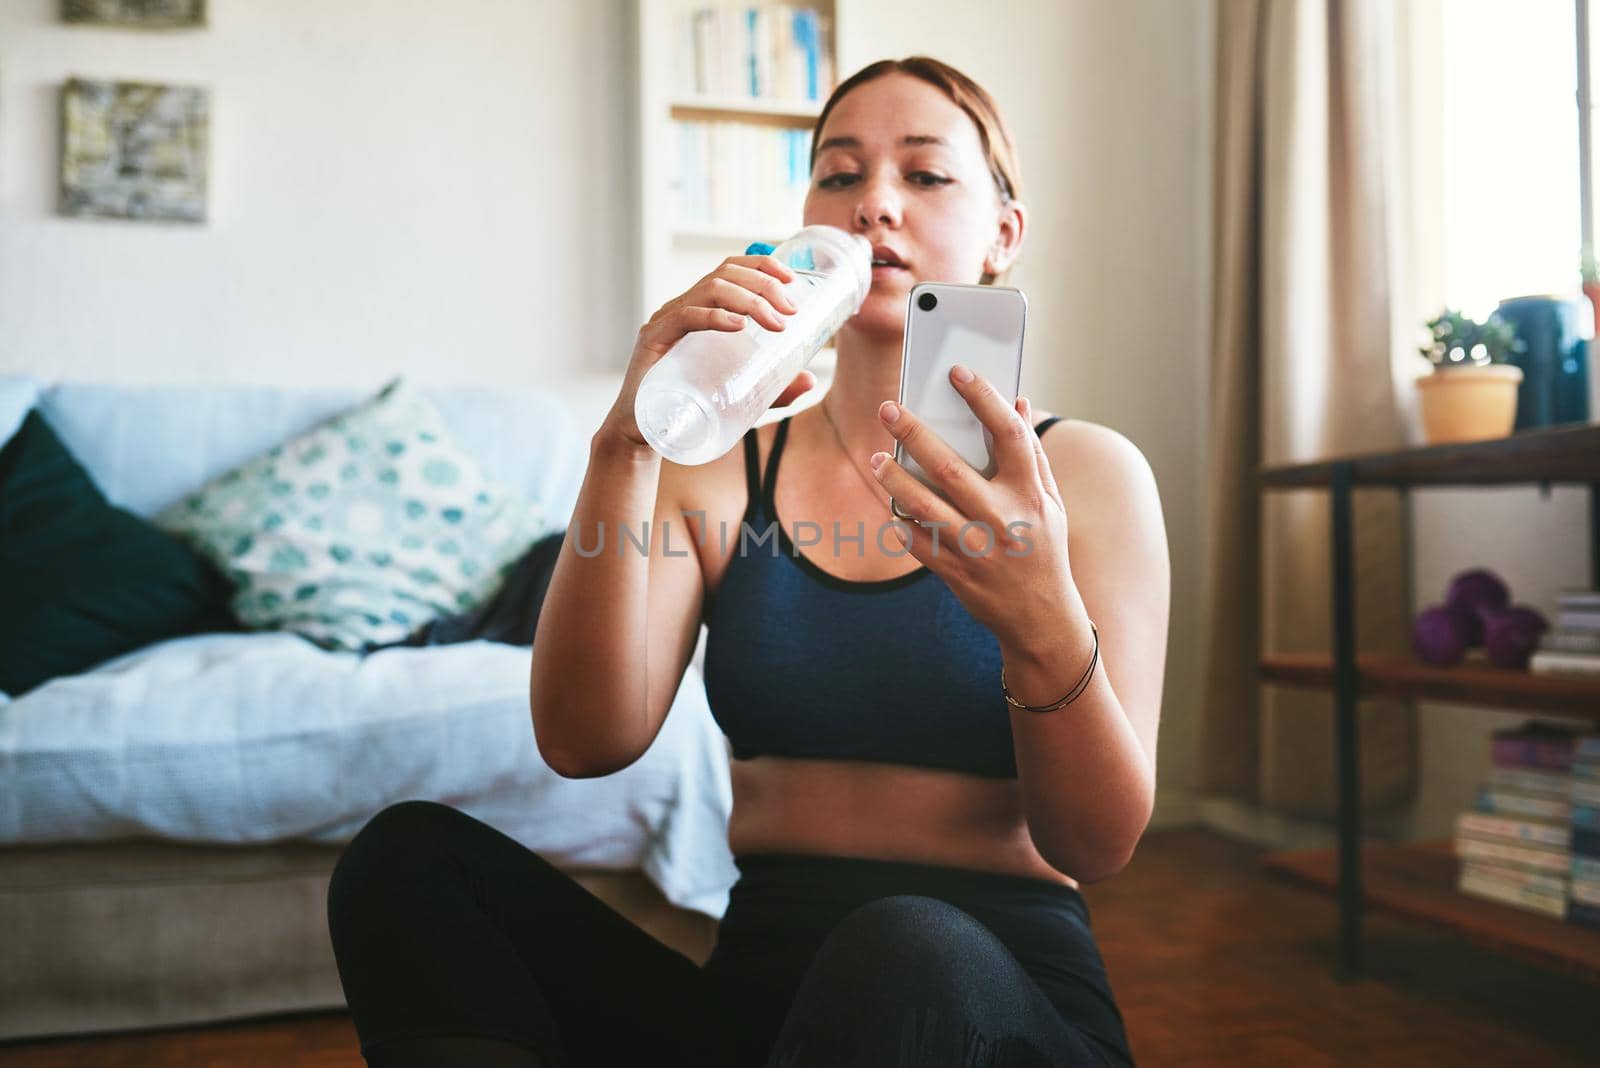 Quick water and social media break. an attractive young woman sitting and drinking water while using her cellphone after a workout